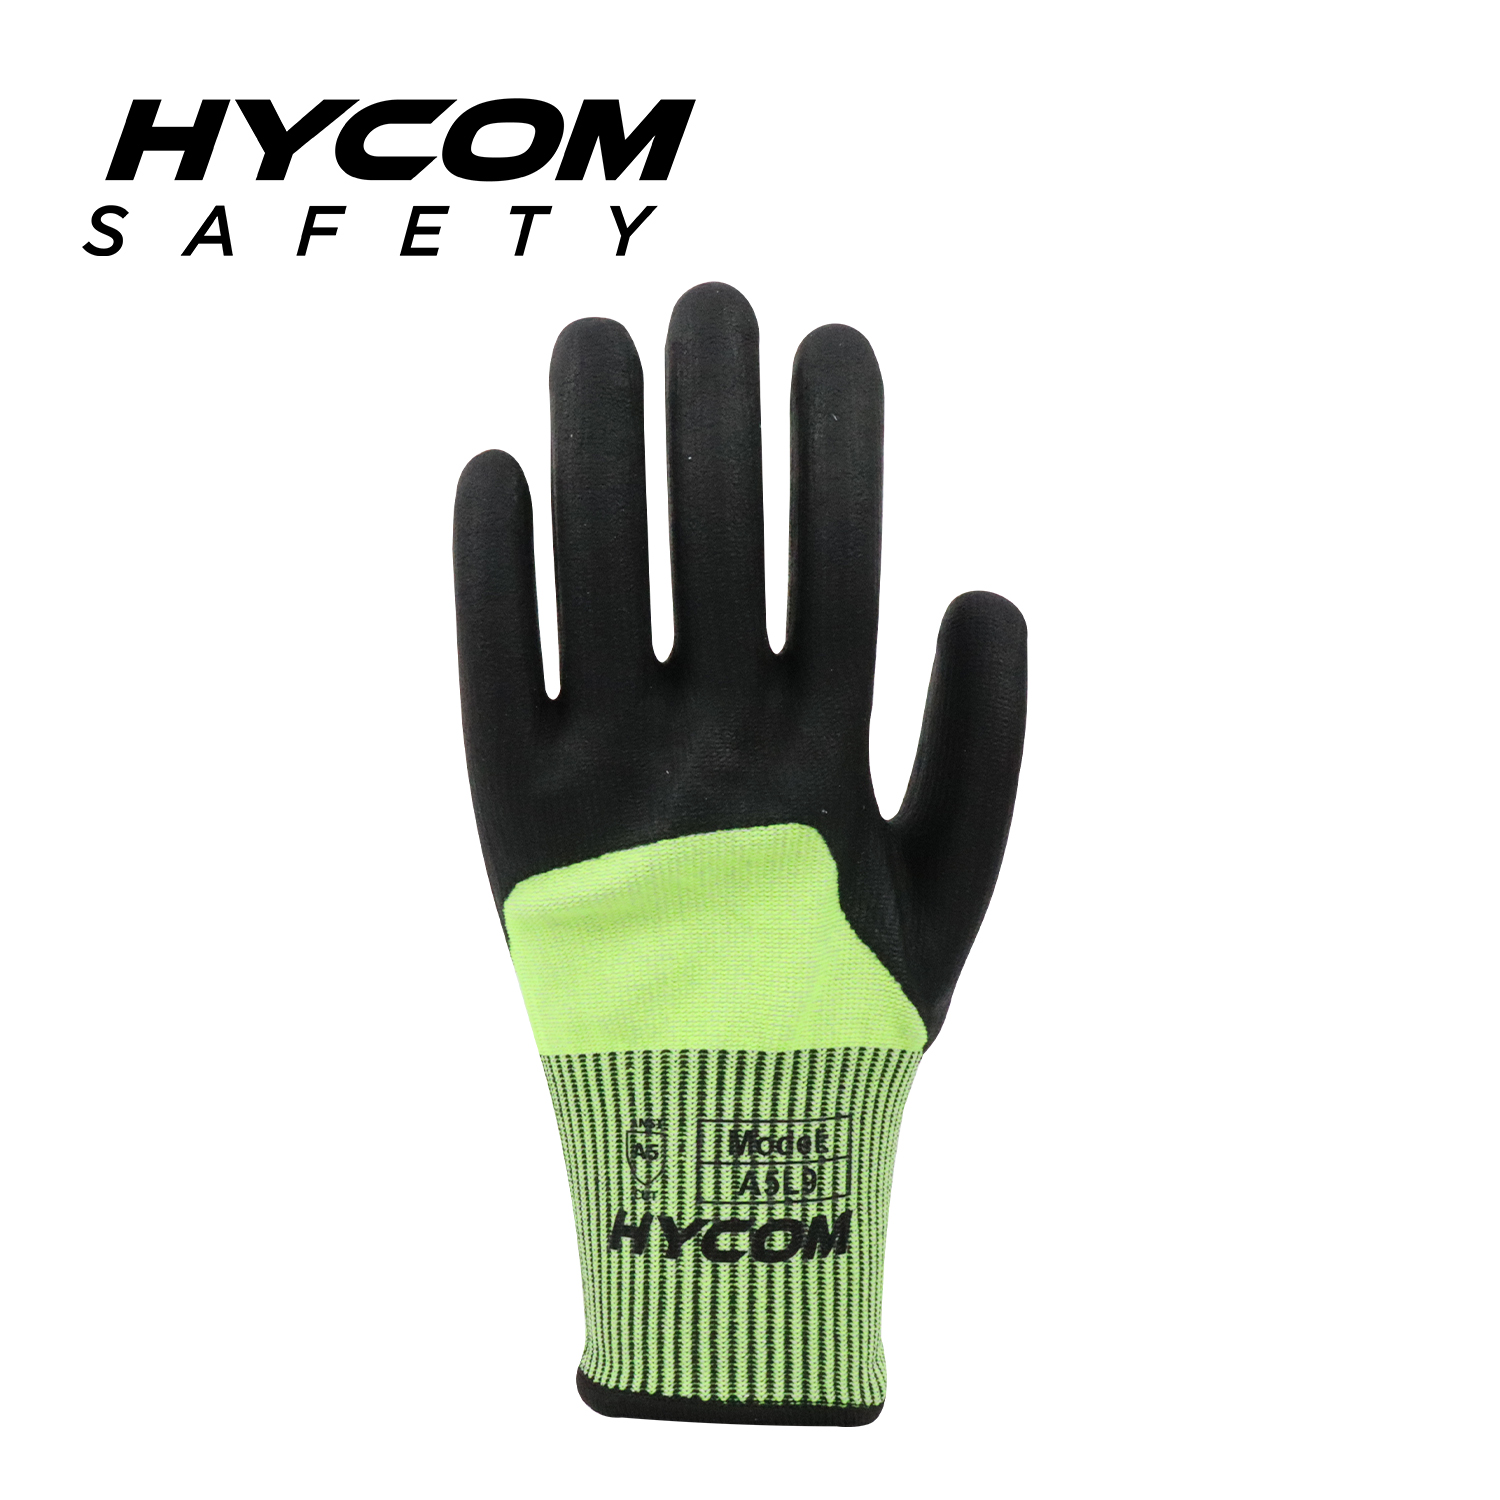 HYCOM 13GG ANSI 5 Cut Resistant Glove with 3/4 Nitrile Coating PPE Work Gloves